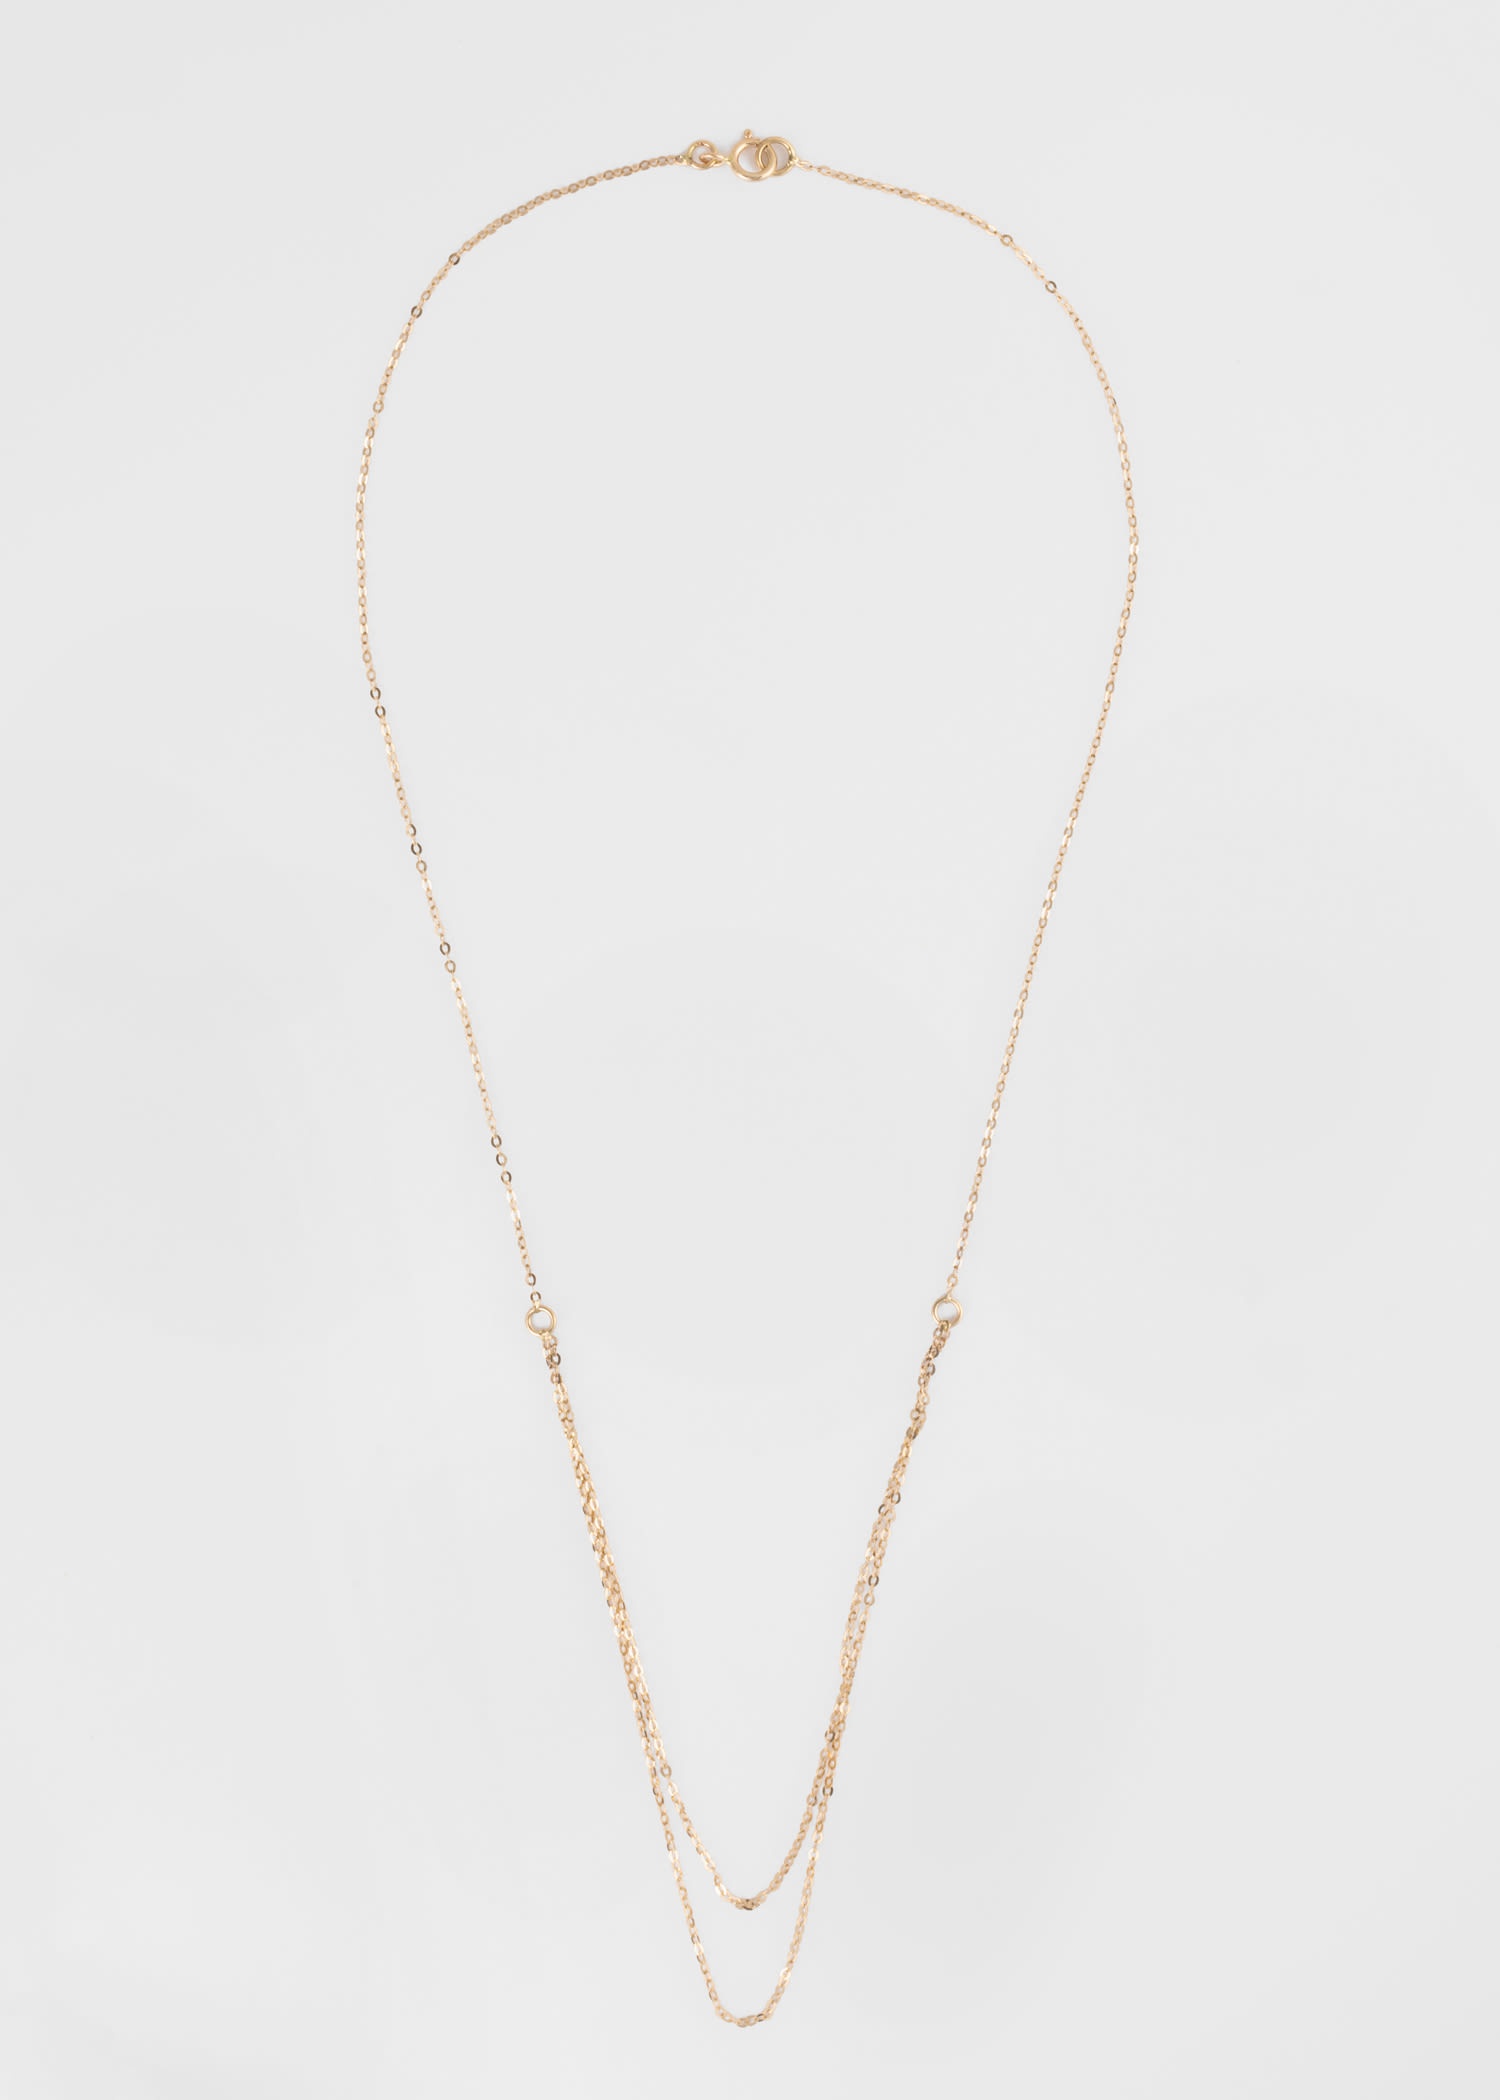 'Charlotte' Gold Double Chain Necklace by Helena Rohner - 2